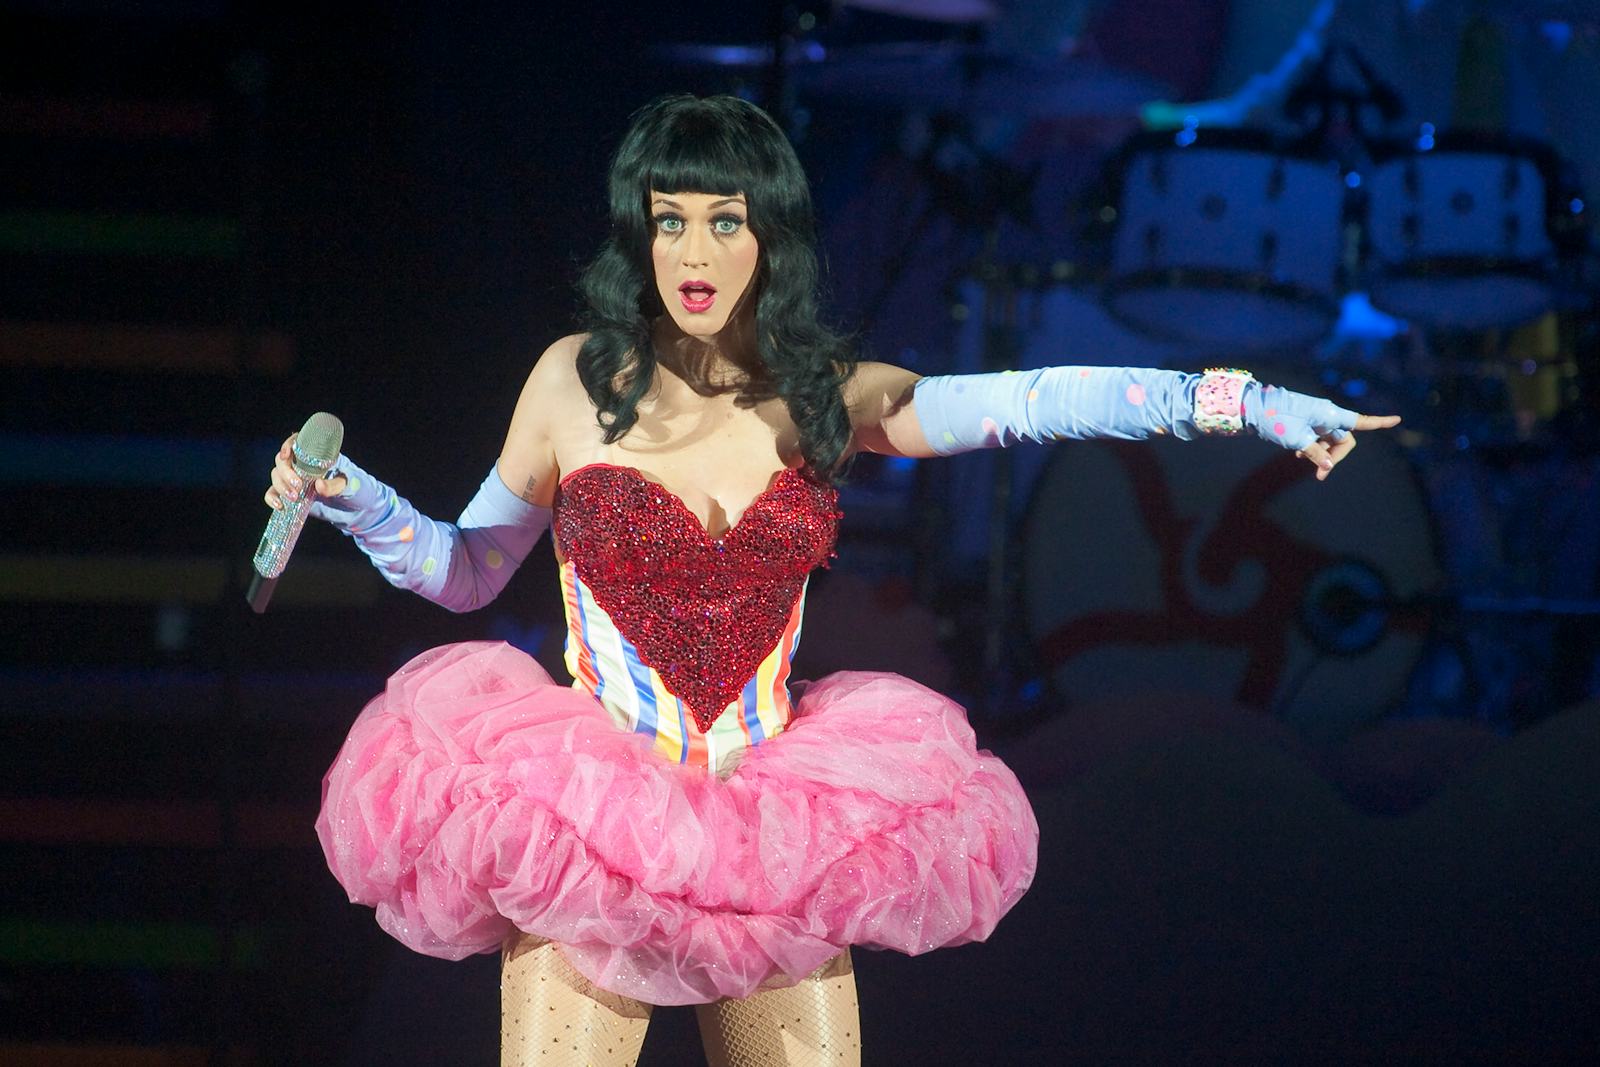 What Your Pop Star Halloween Costume Choice Says About You